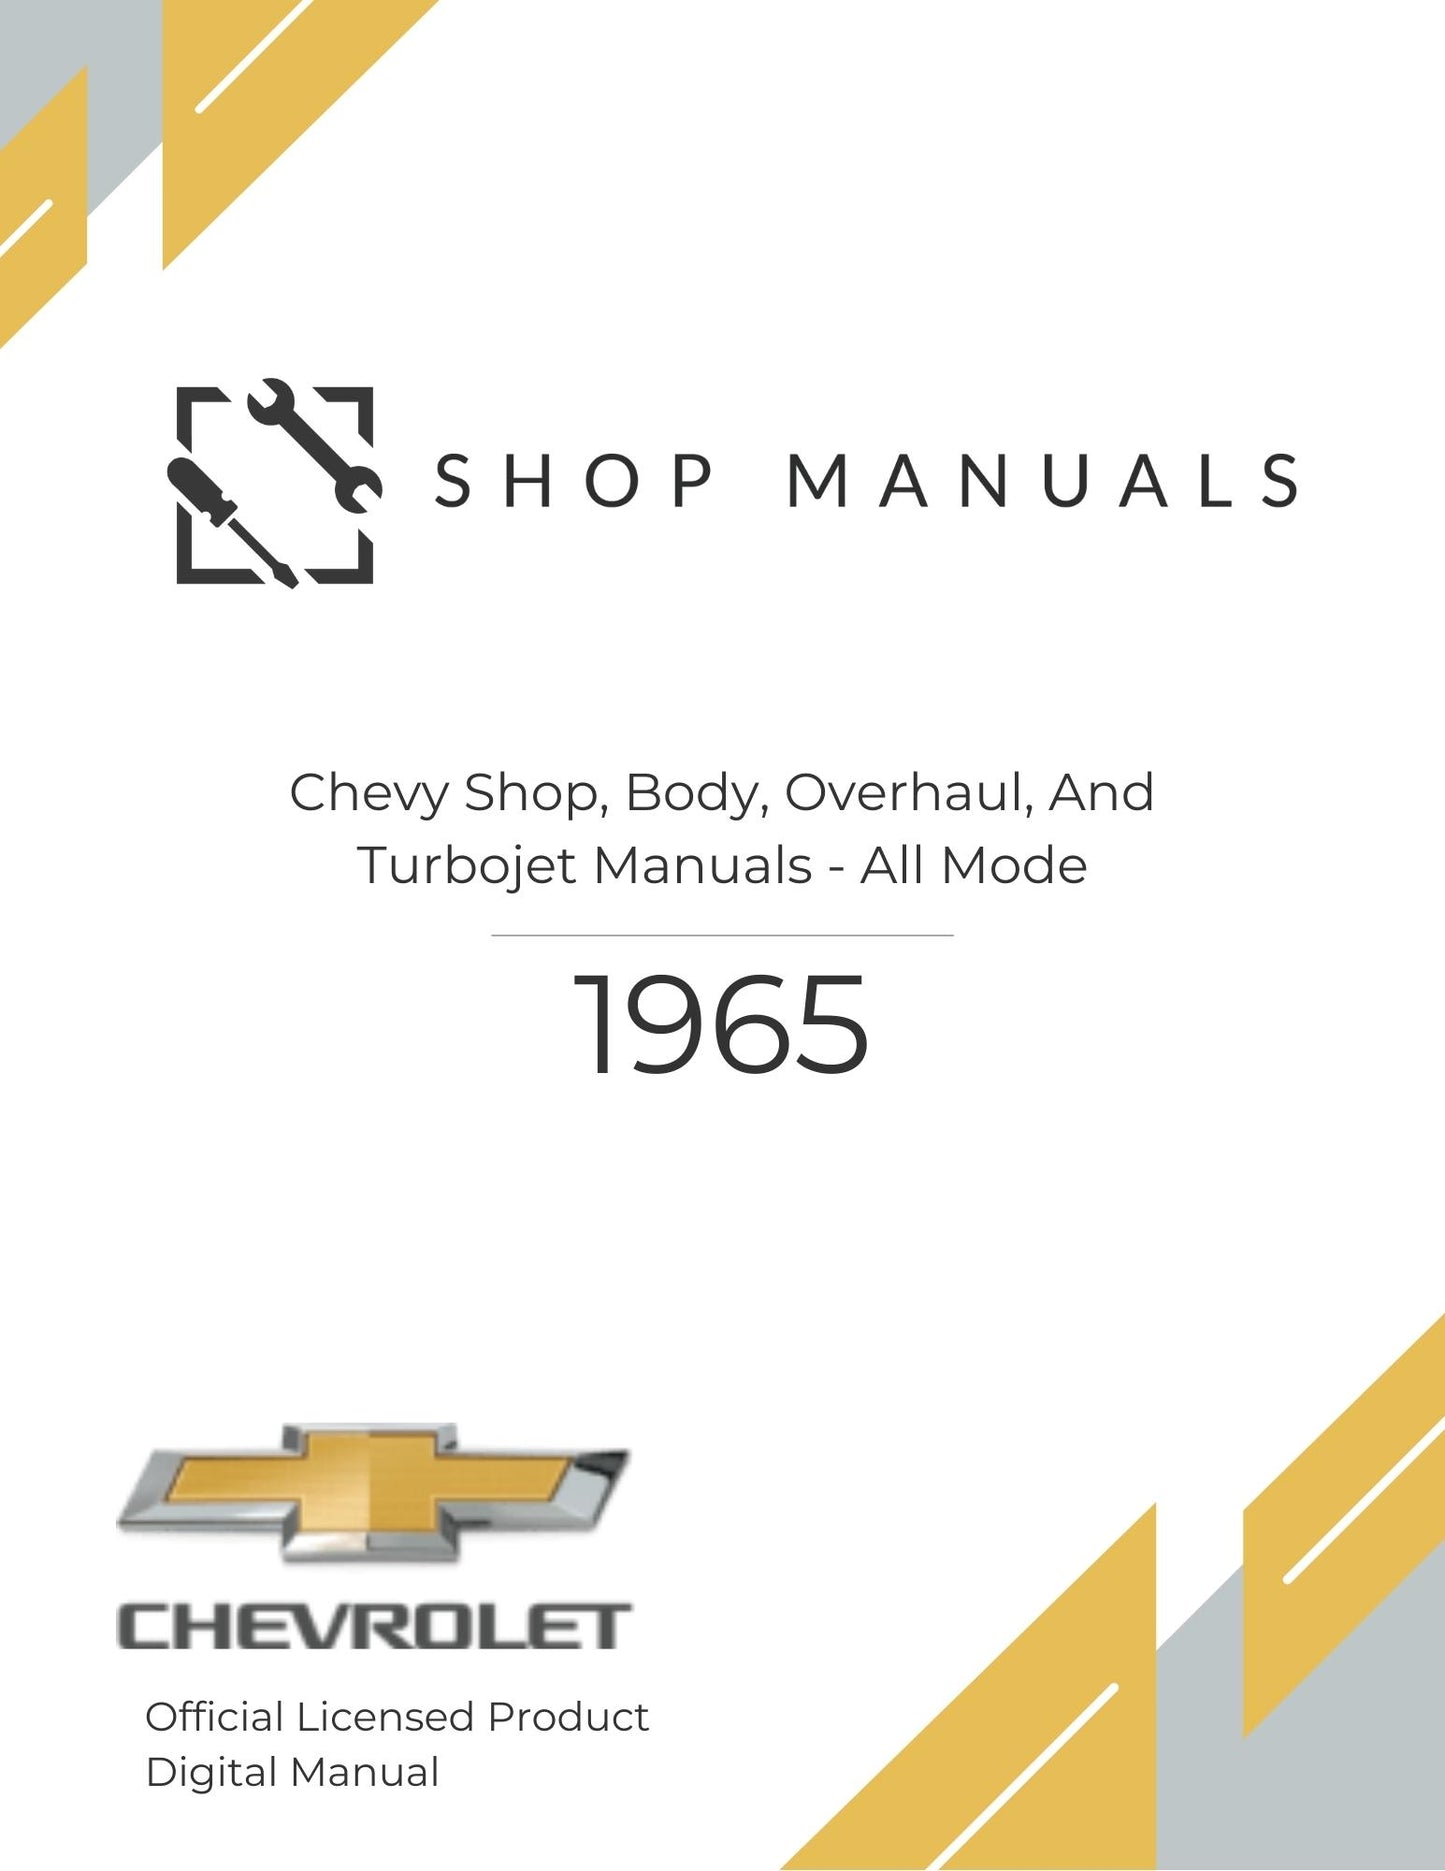 1965 Chevy Shop, Body, Overhaul, And Turbojet Manuals - All Mode